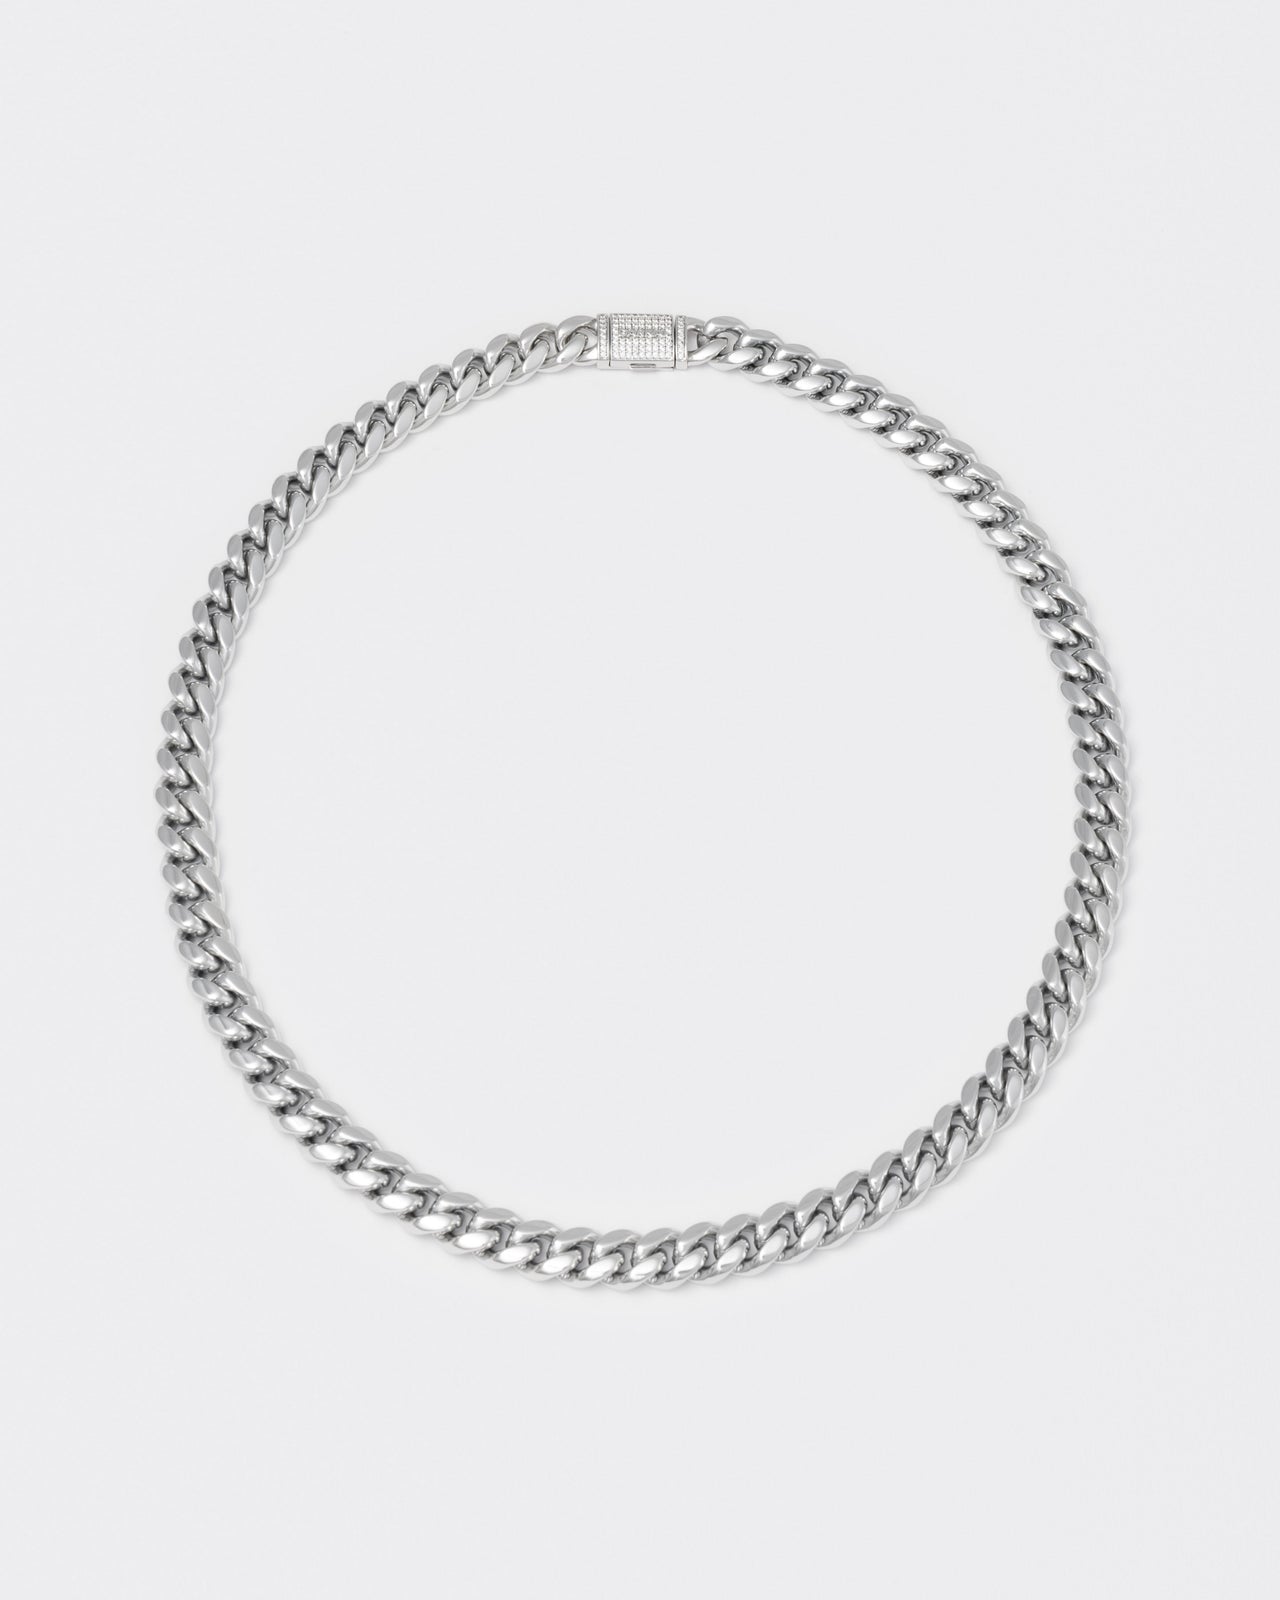 18k white gold coated cuban chain necklace with hand-set micropavé stones in white